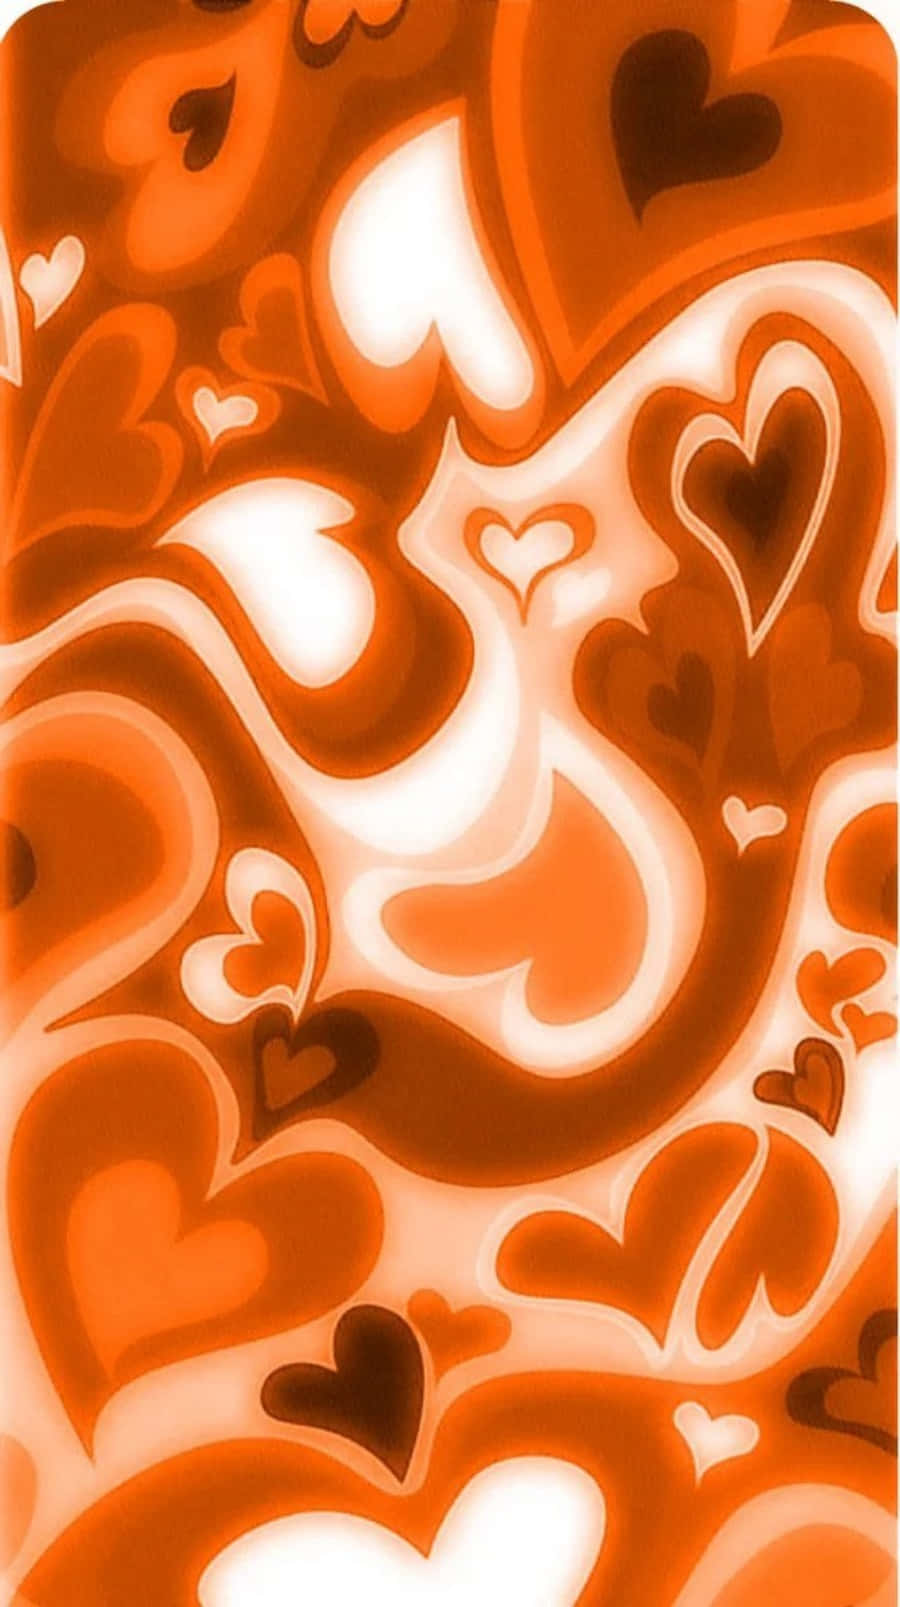 Radiant Heart Filled with Love Wallpaper